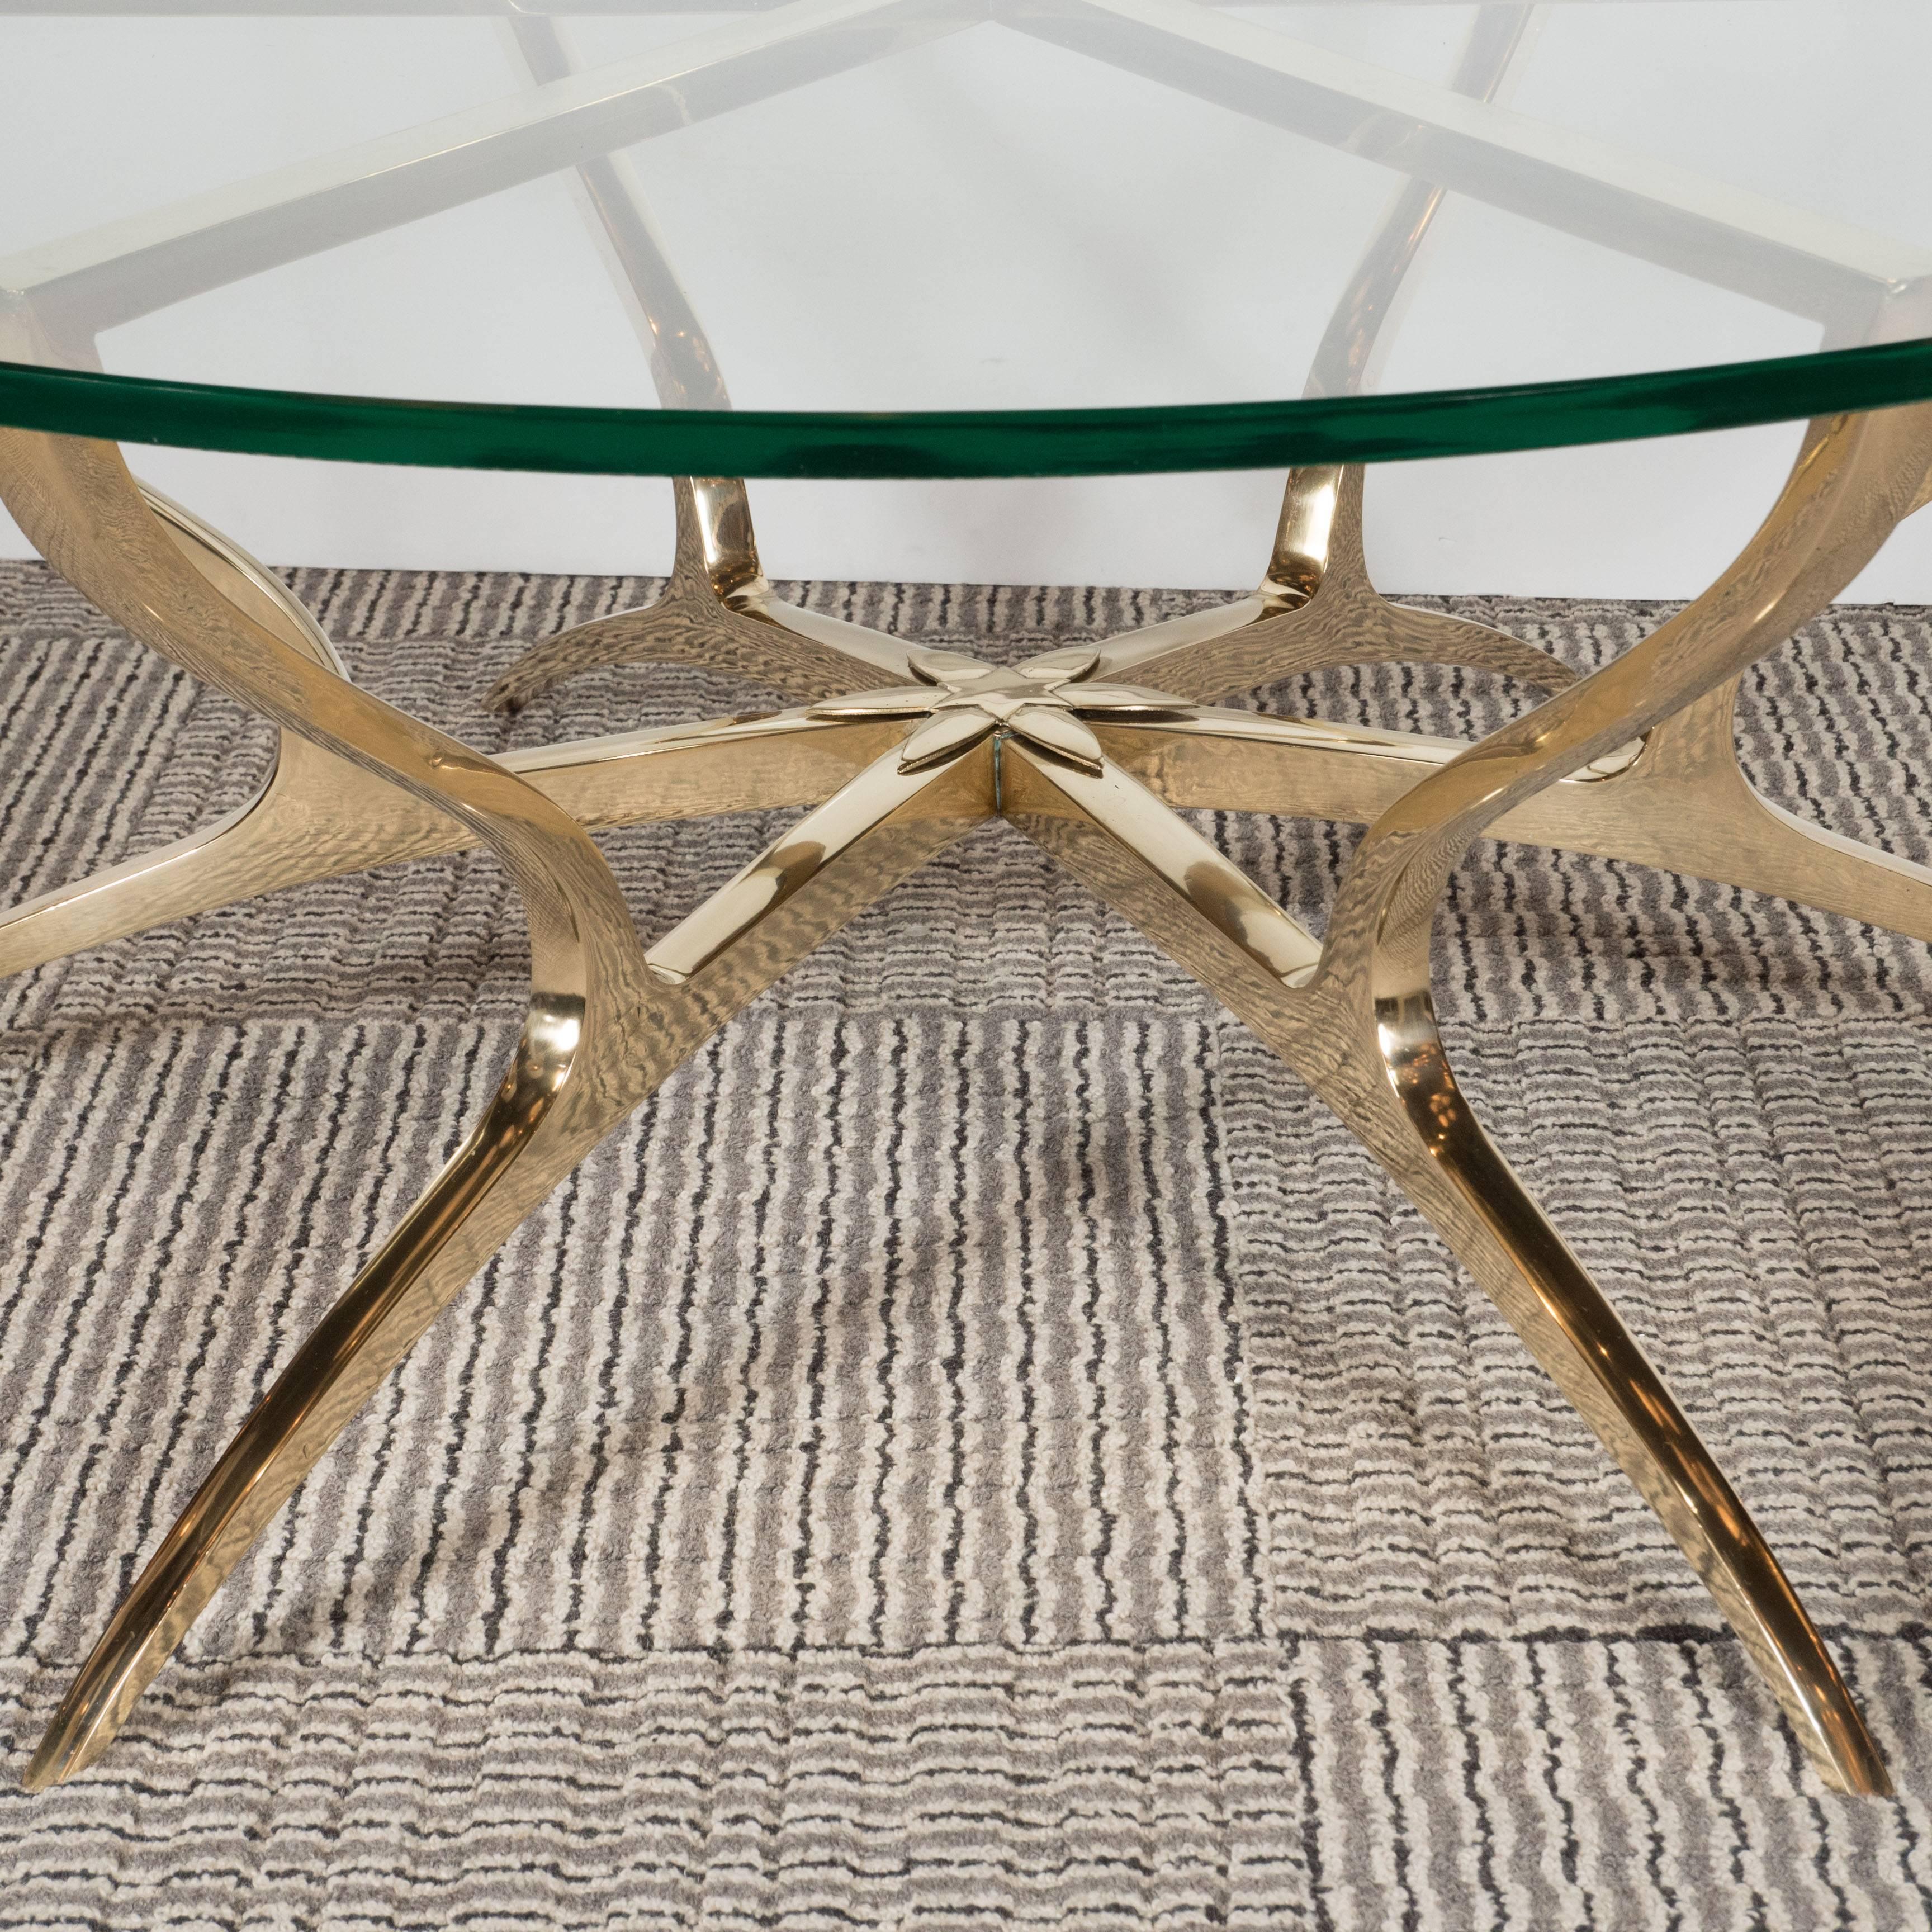 Late 20th Century Italian Mid Century Modern Glass & Solid Brass Sculptural Center Table